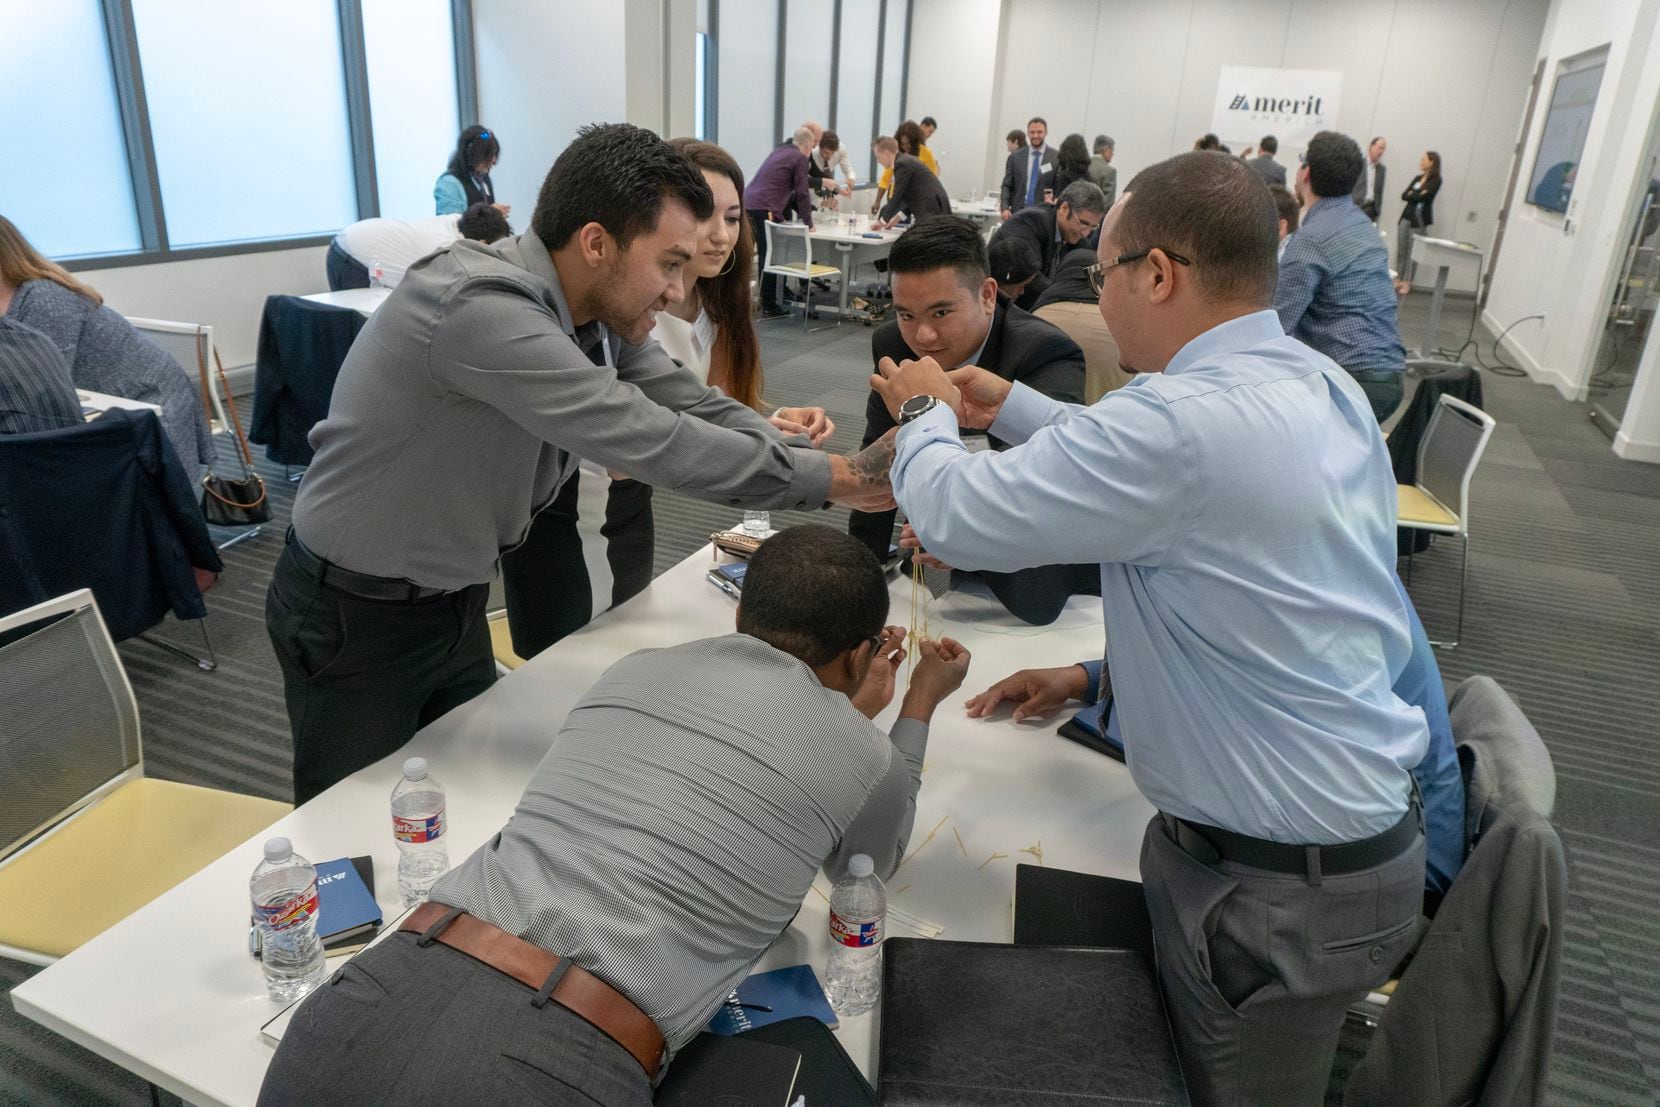 Merit America participants participate in a group activity during their cohort launch event.